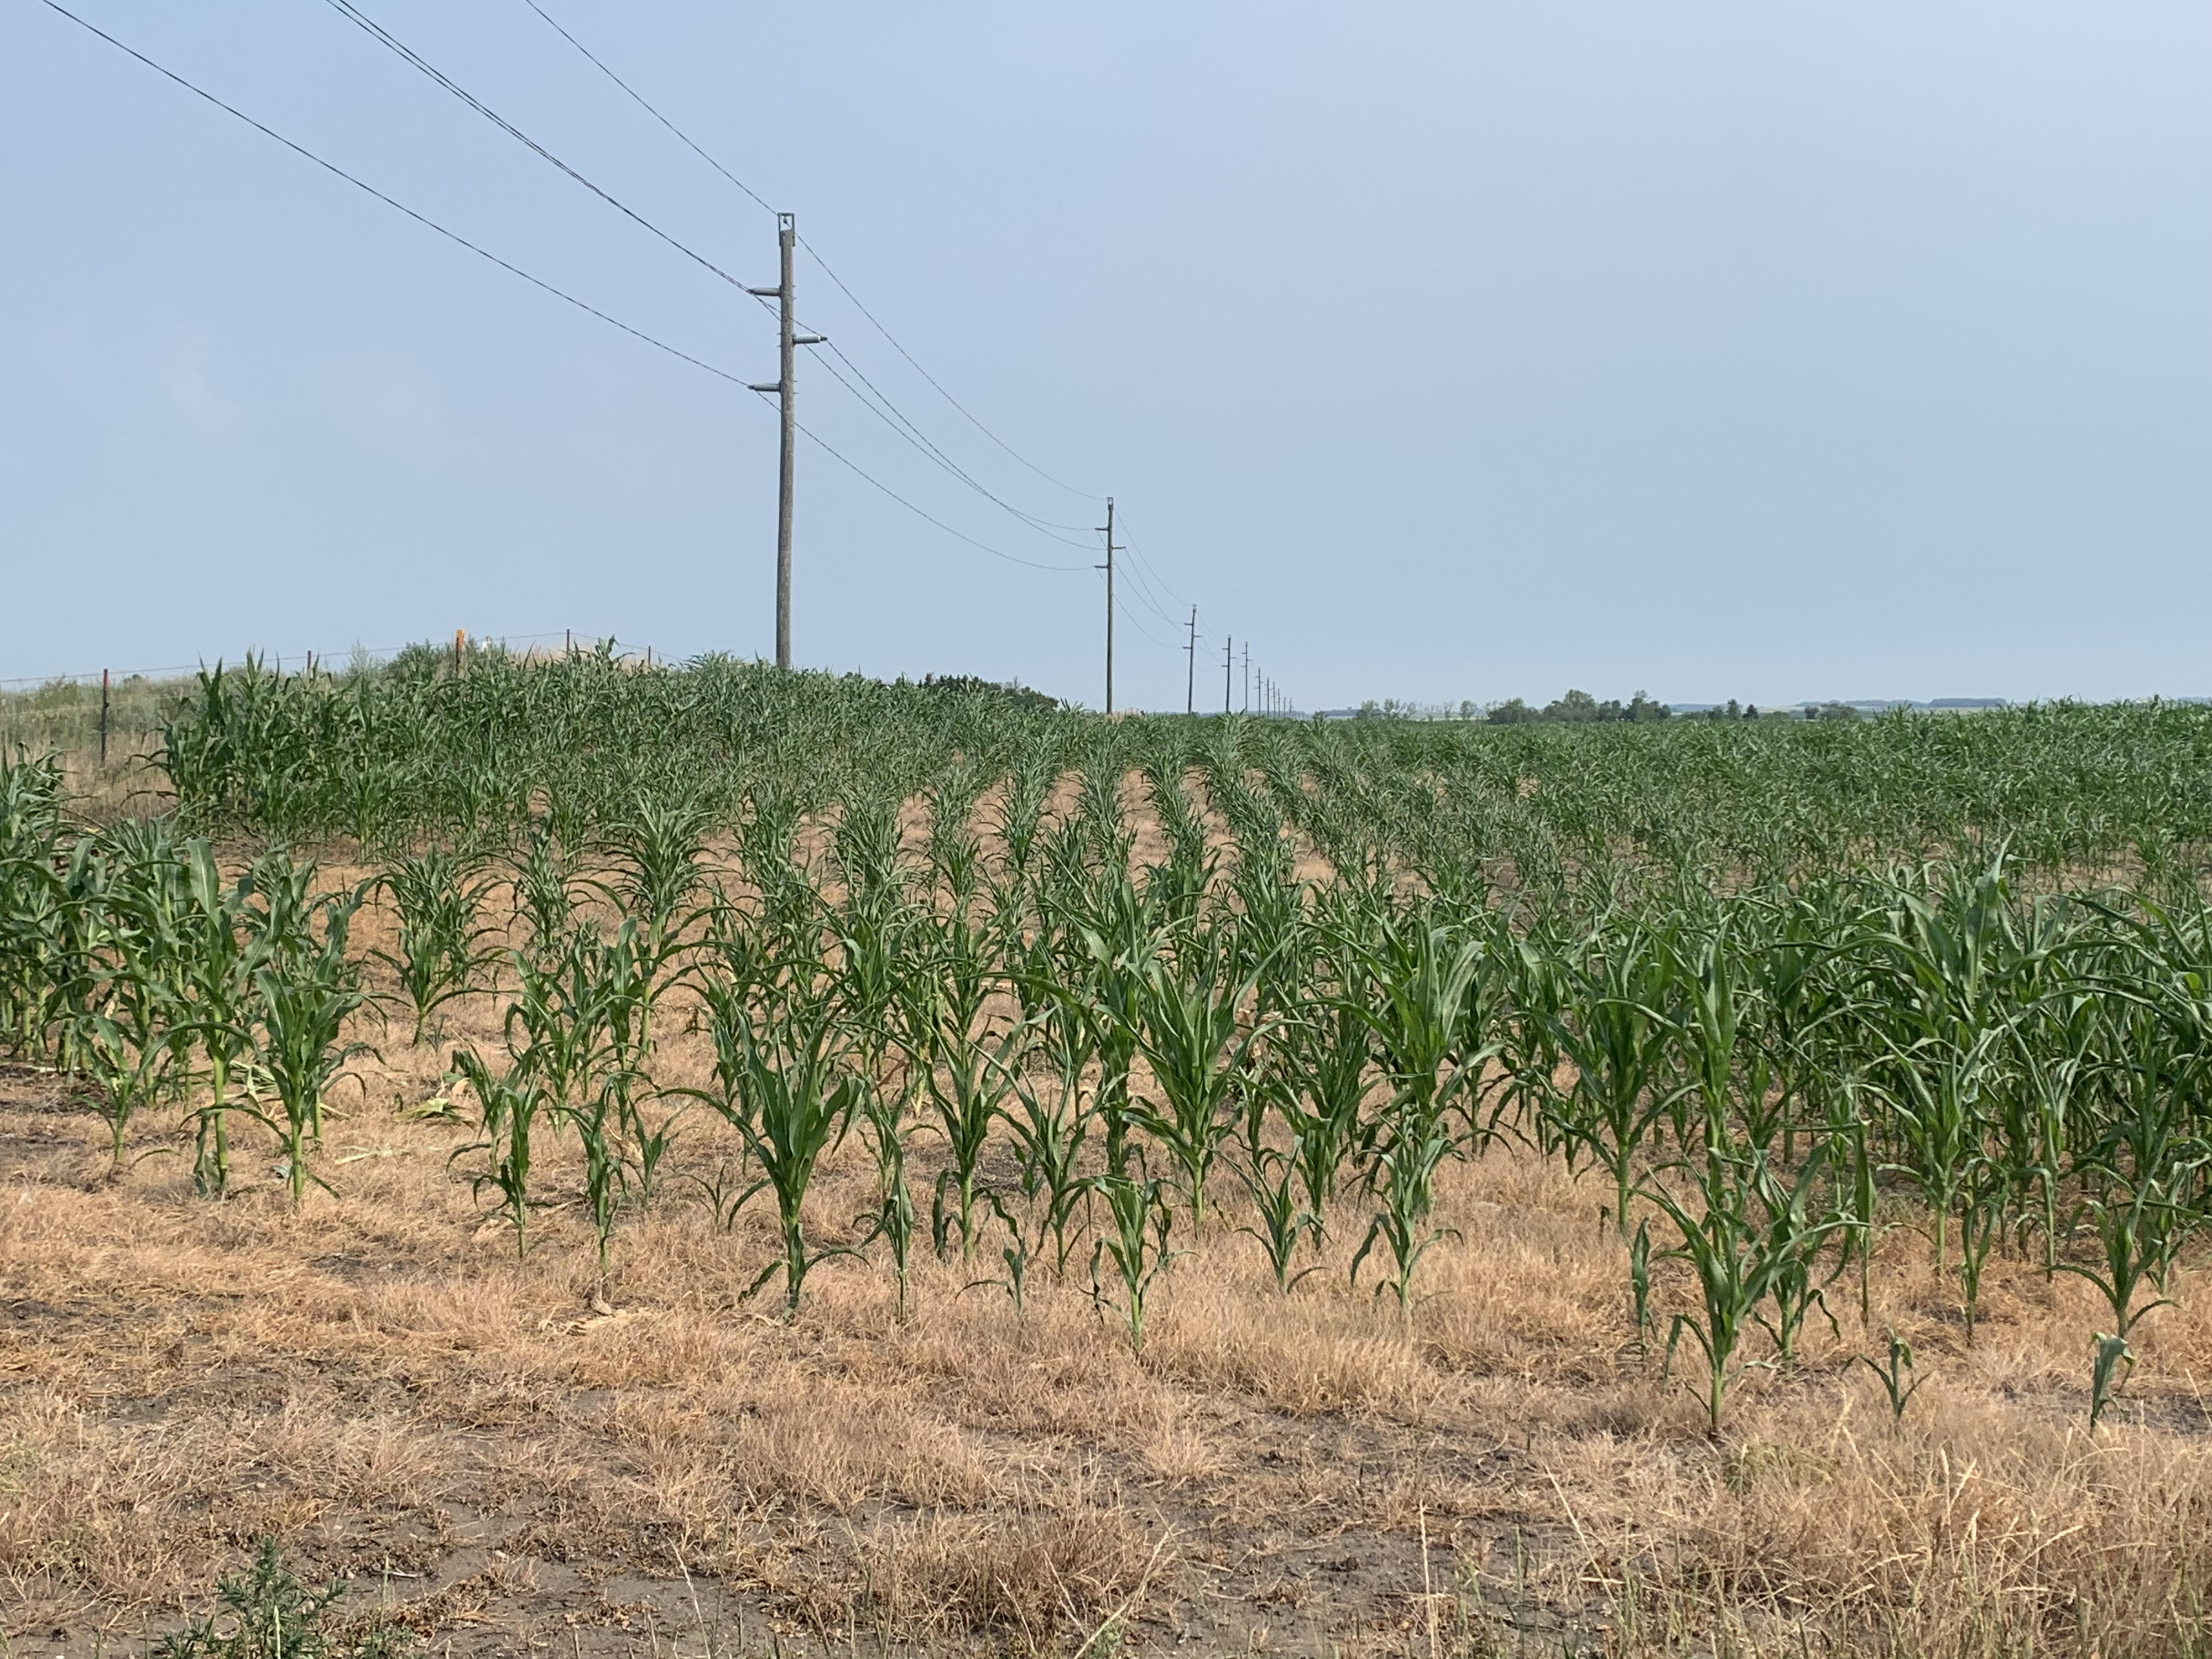 Afternoon Ag News, August 23, 2021: Many Canadian crops lacking in moisture